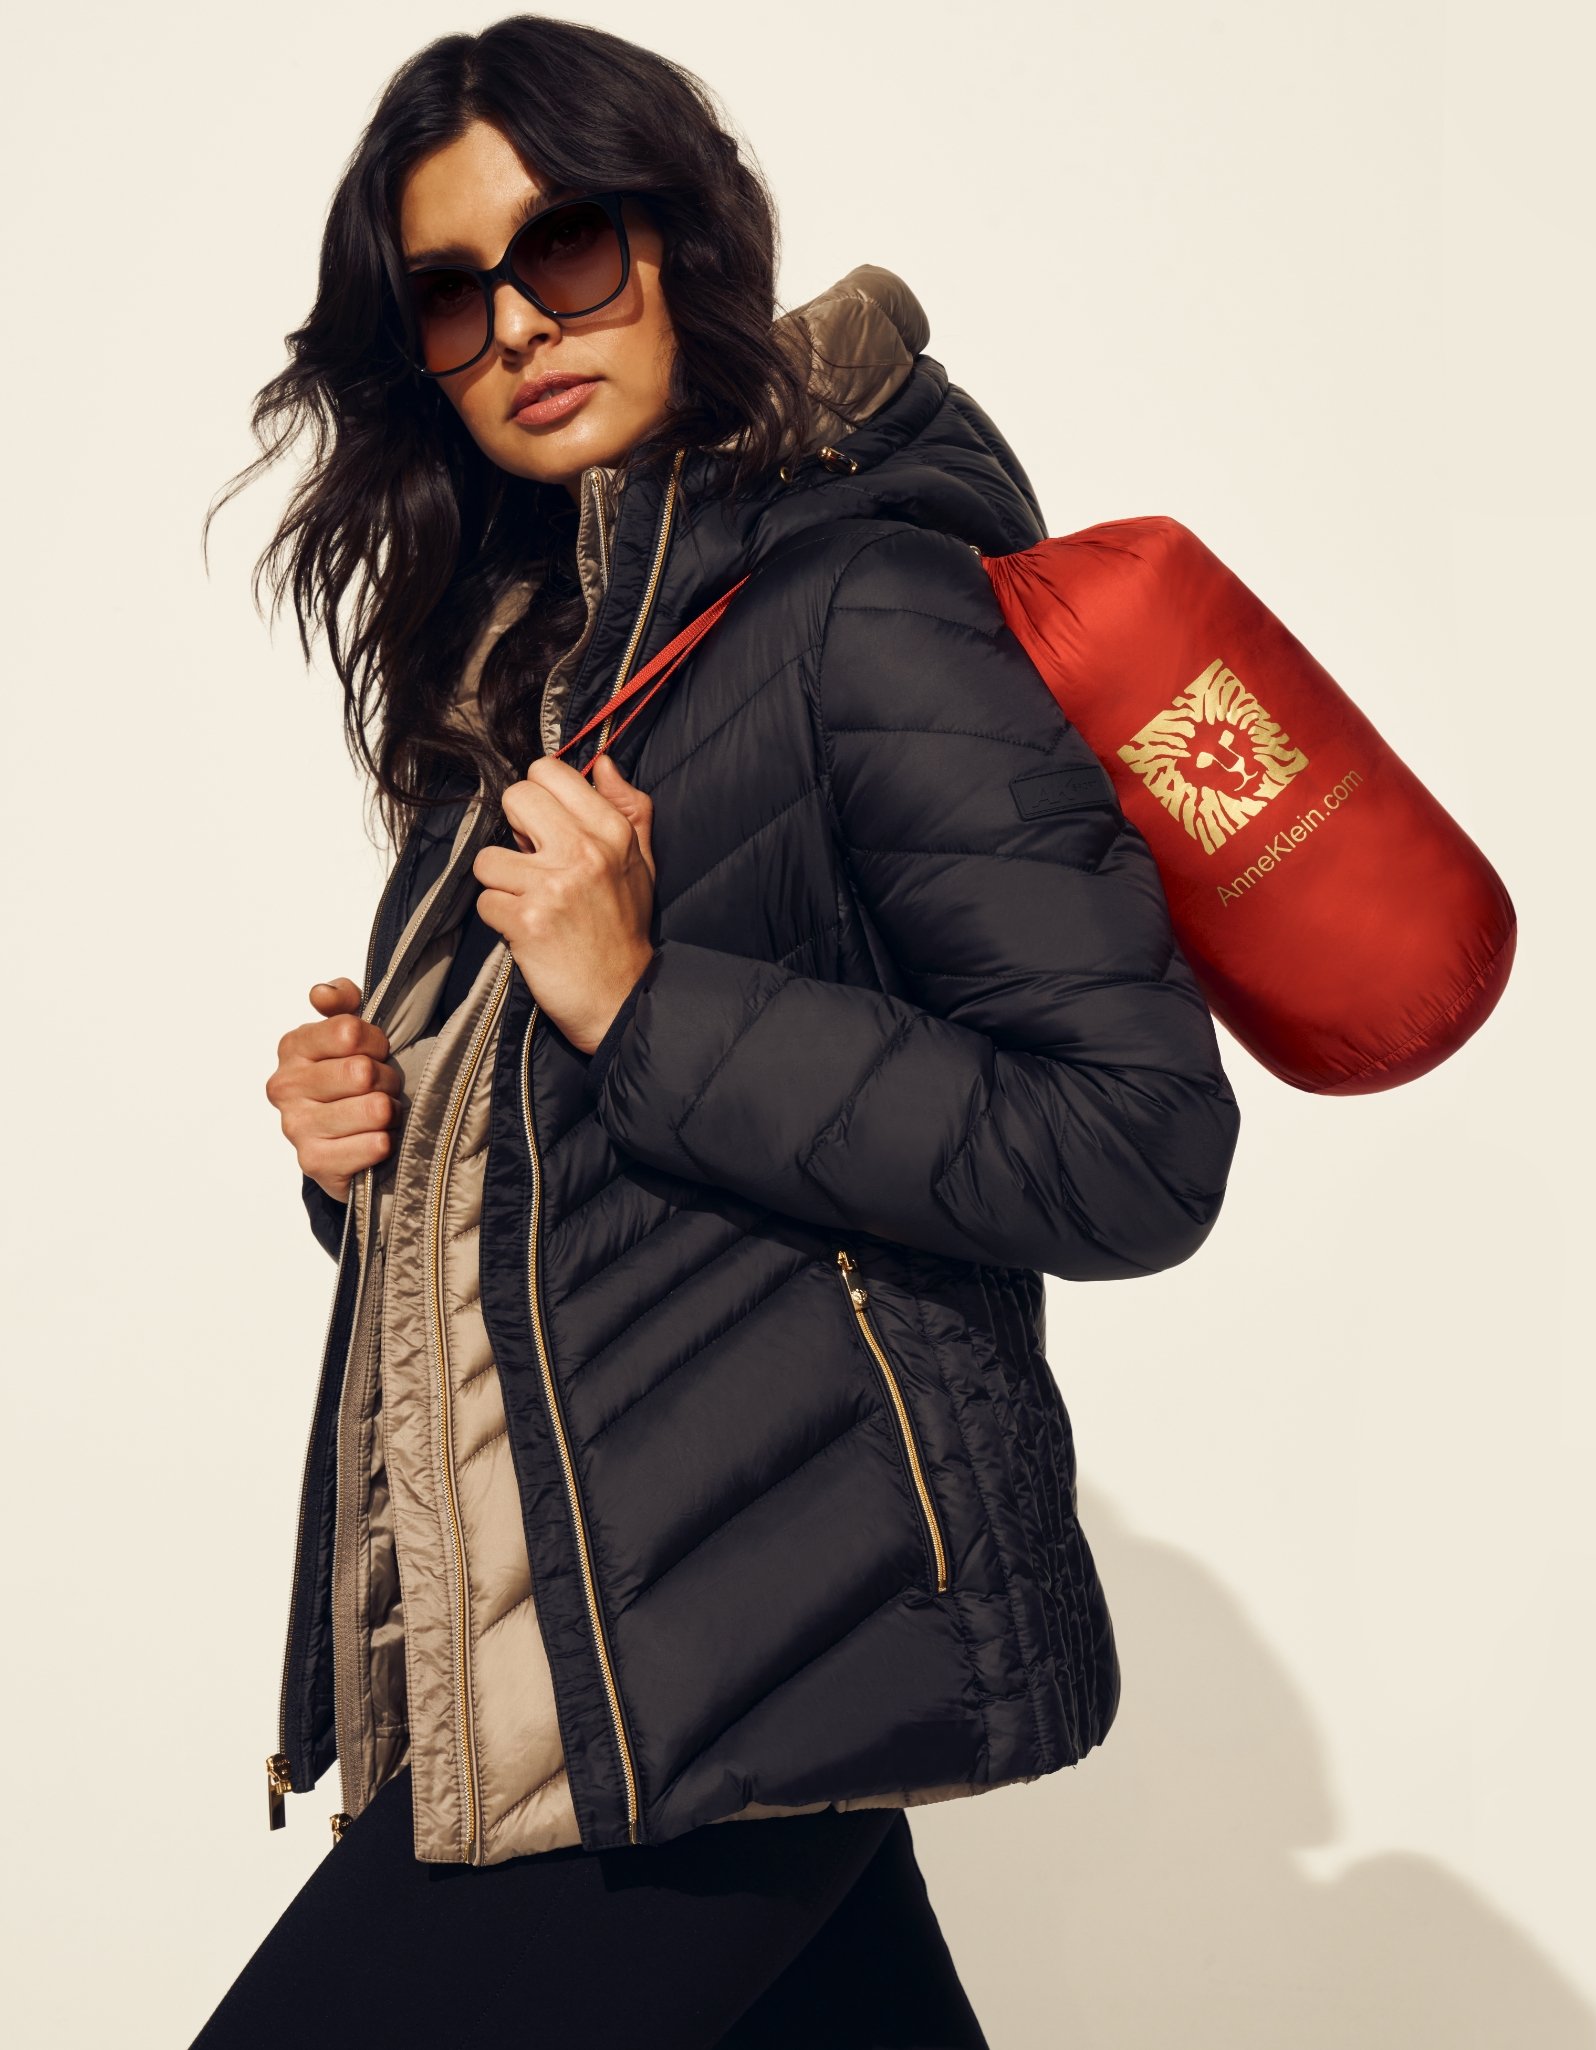 Anne Klein model wearing 2 puffer jackets carrying a third packed jacket